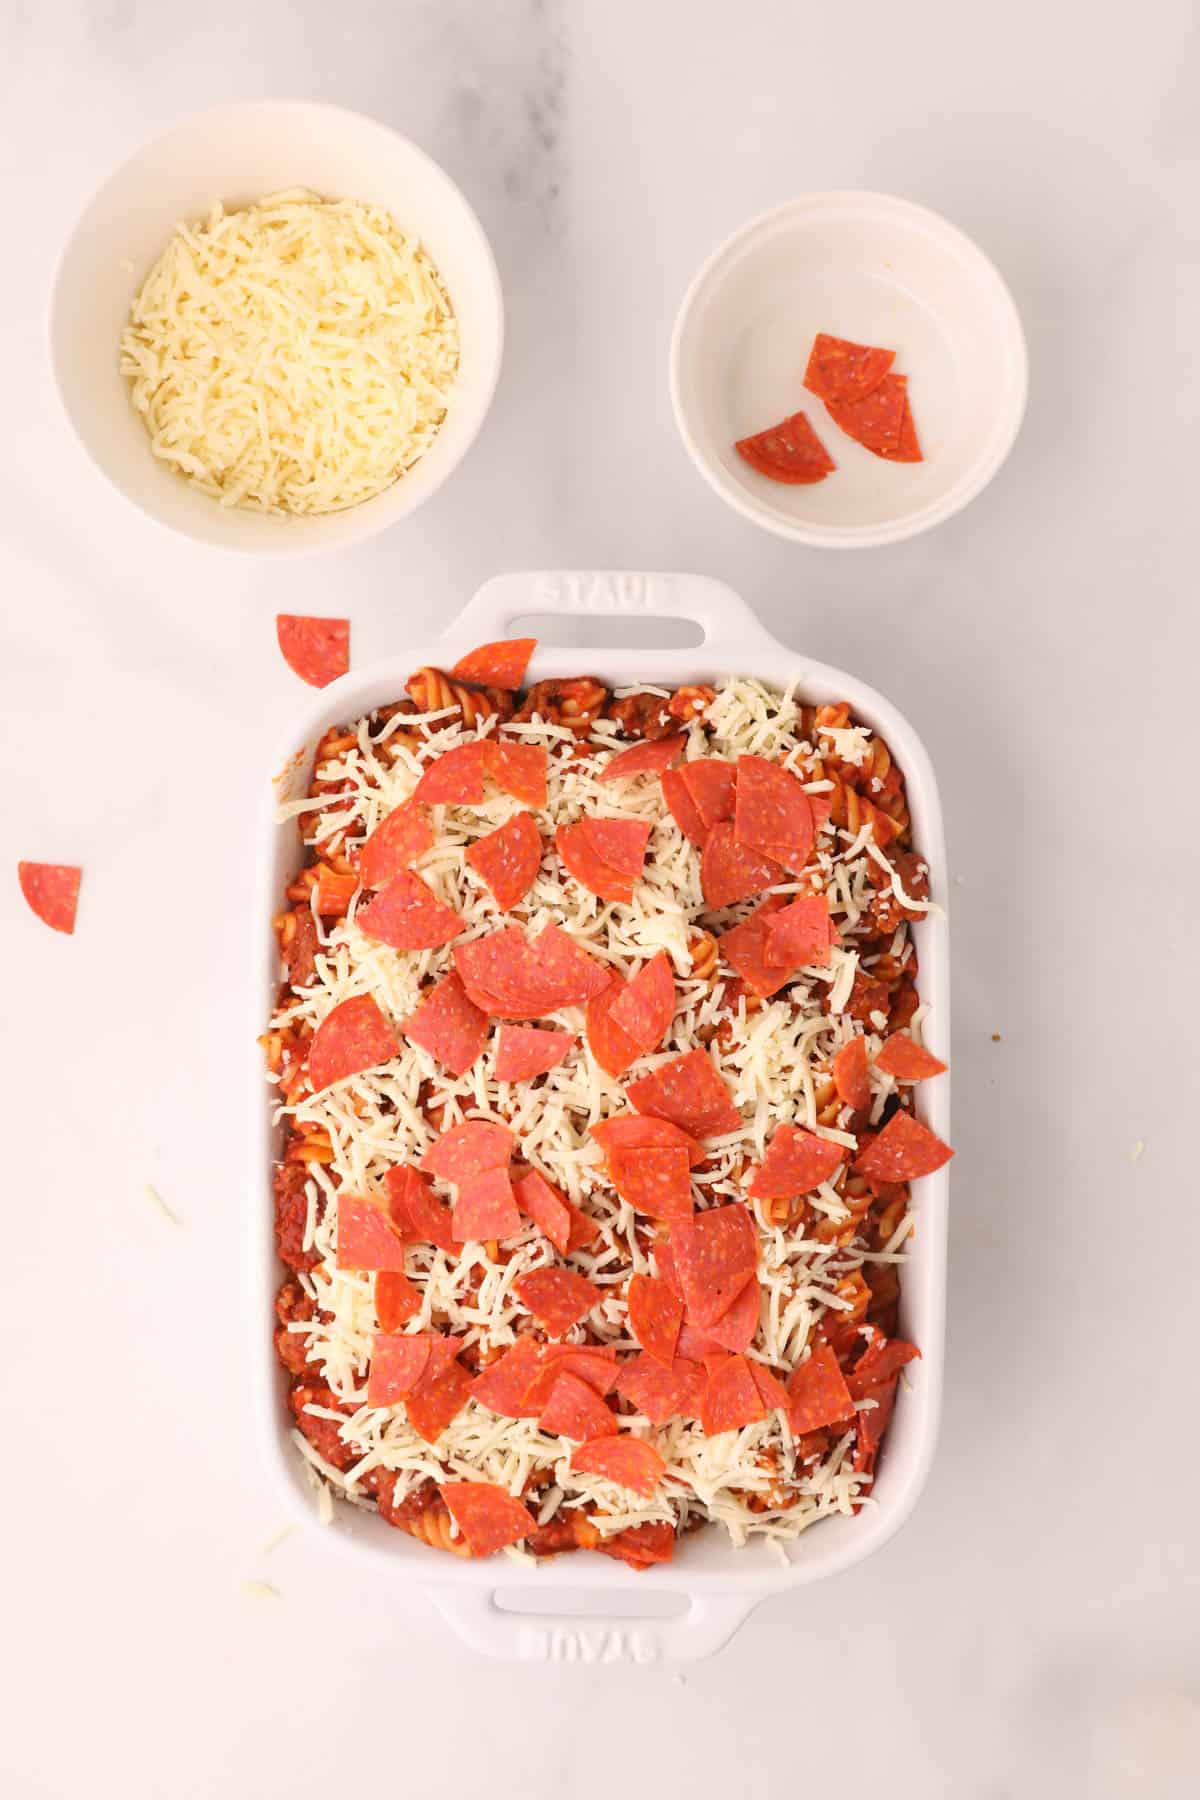 Adding layers of cheese and pepperoni to pizza pasta casserole in a white baking dish.